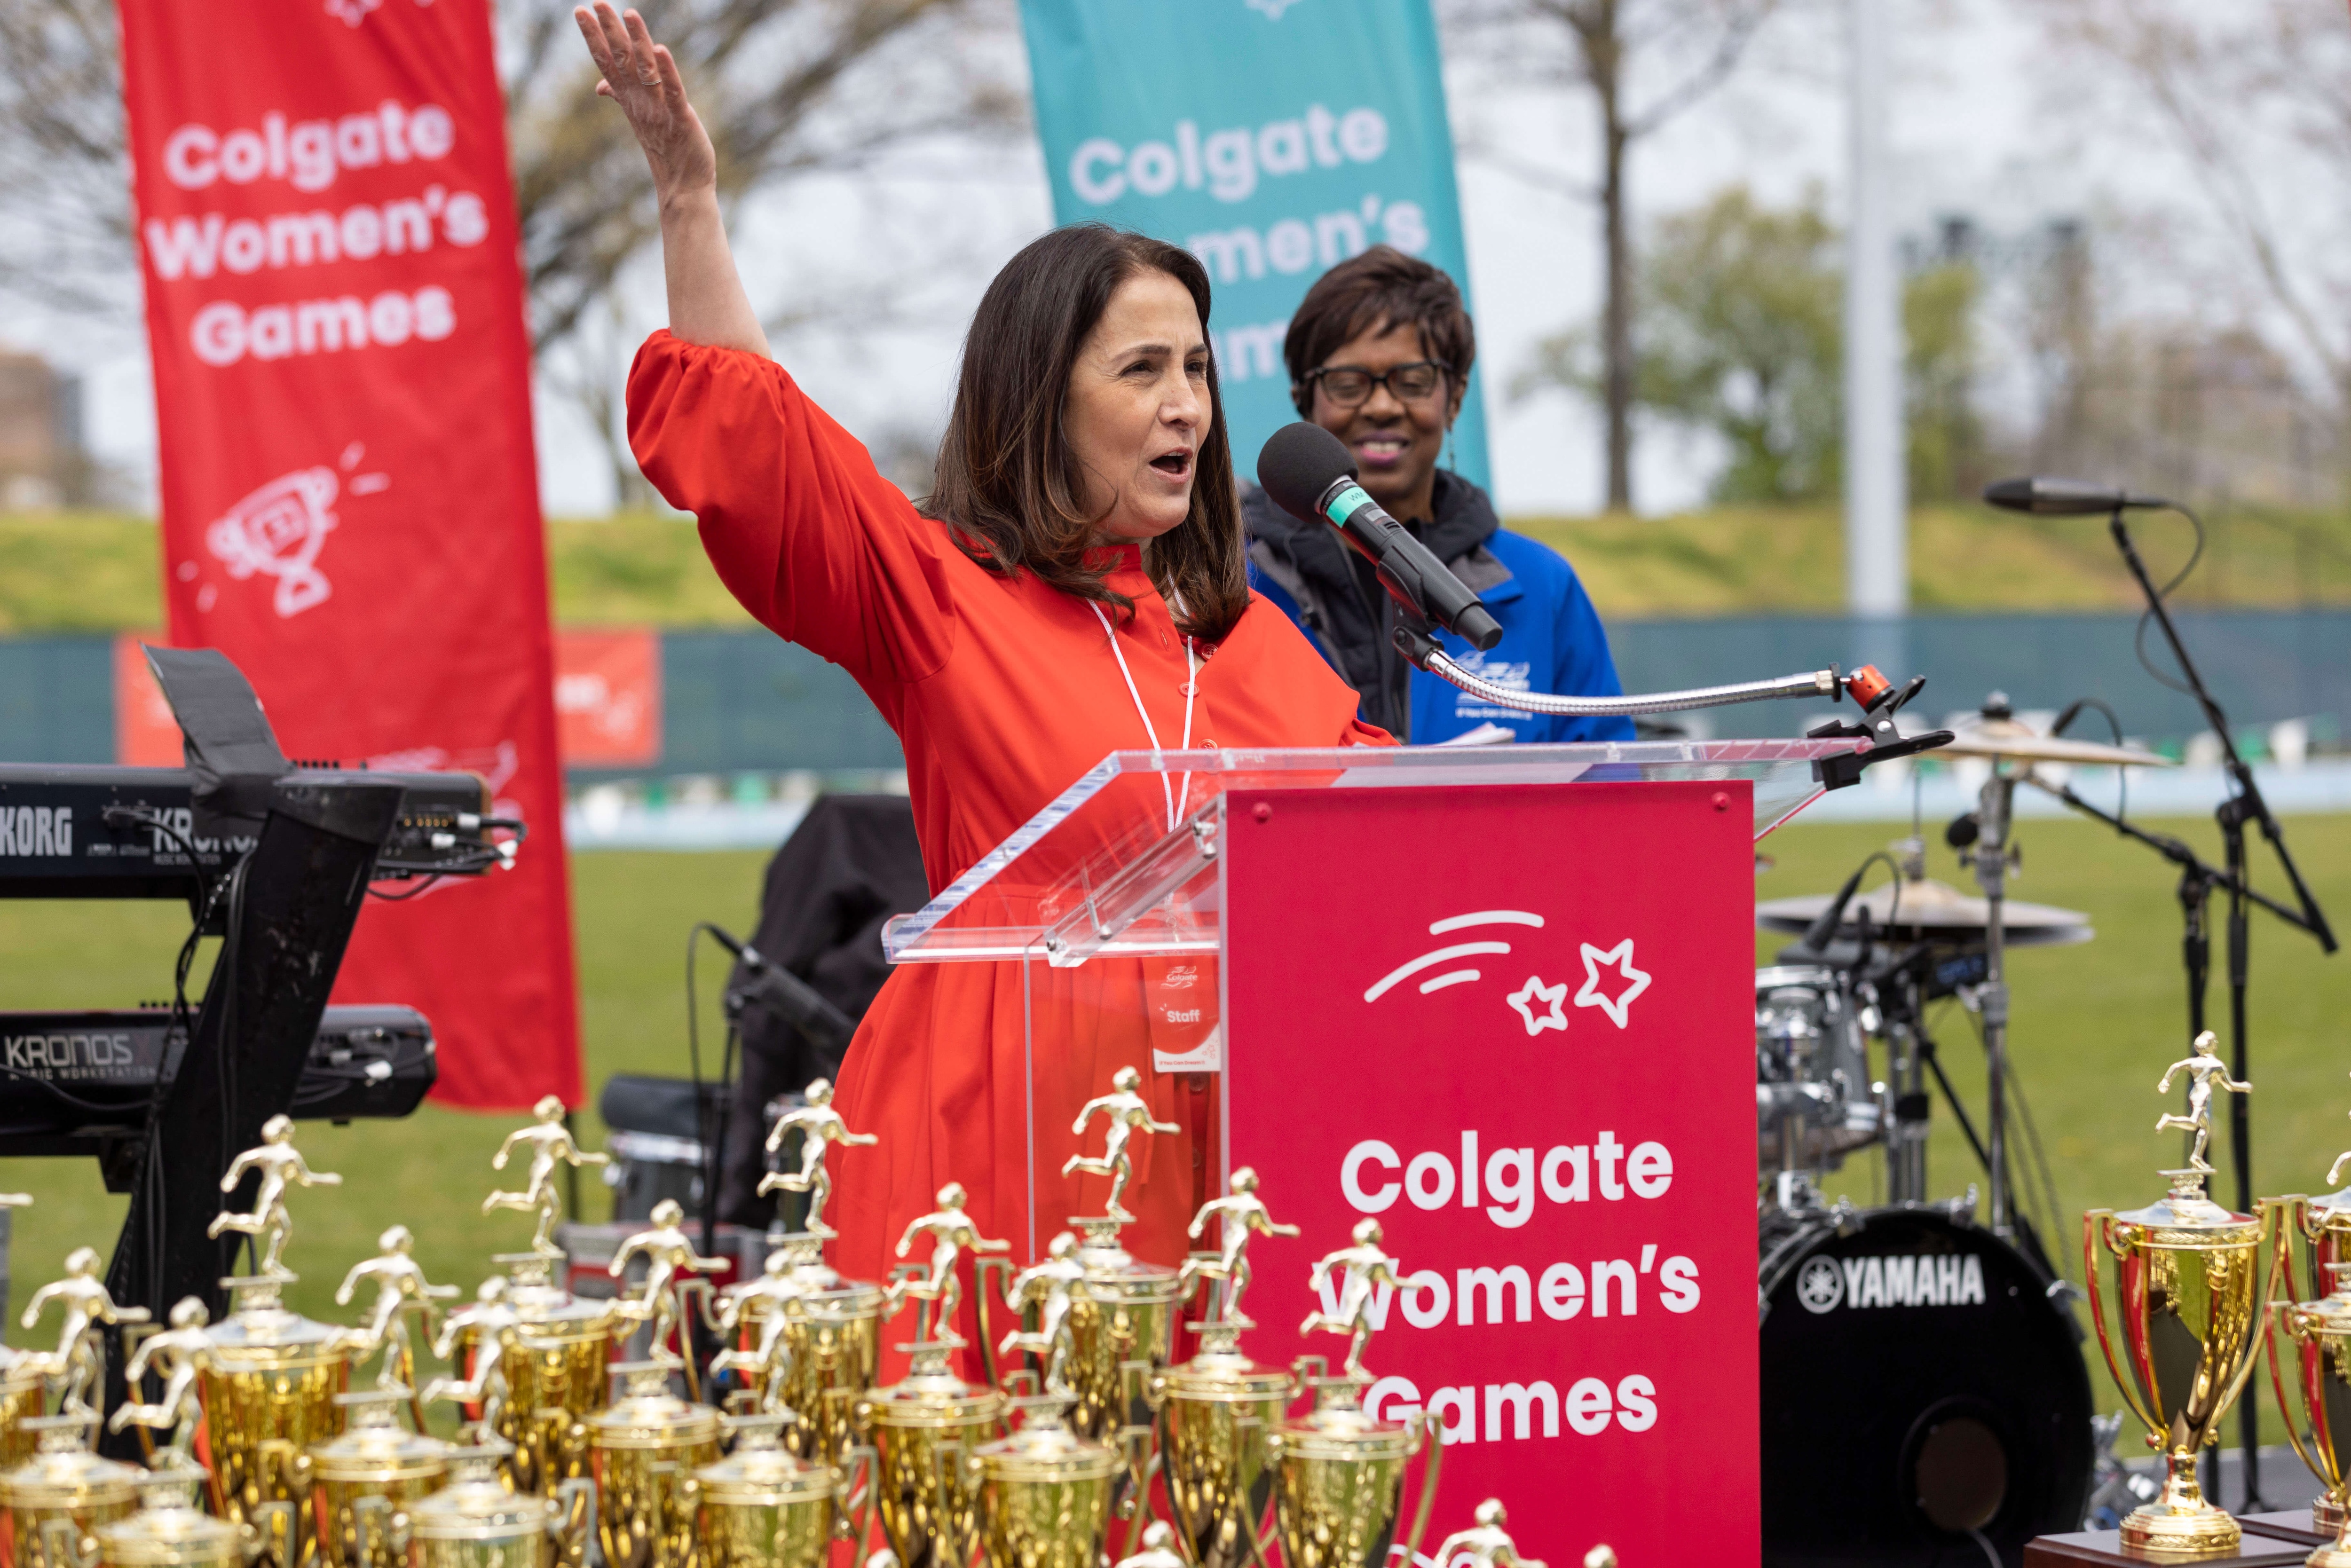 Jennifer Daniels, Colgate's Chief Legal Officer, gives opening remarks at the Colgate Women's Games 47th Season Finals.